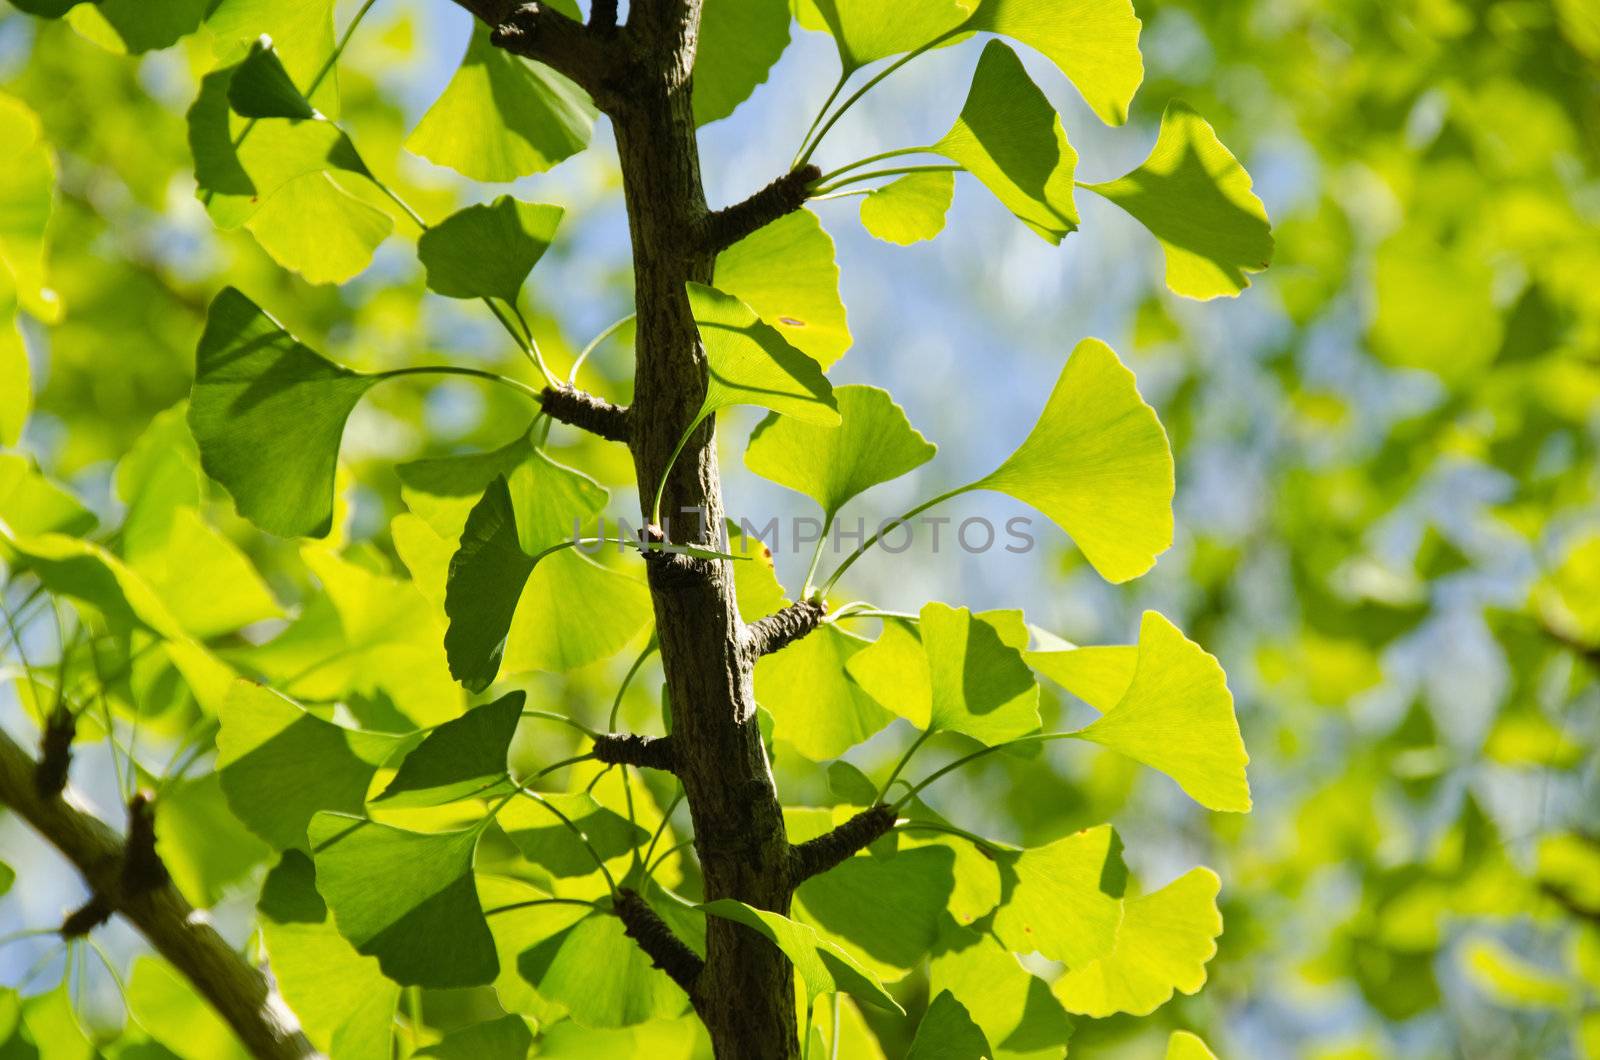 Leaves of Ginkgo biloba on the tree in sunshine with blue sky in background